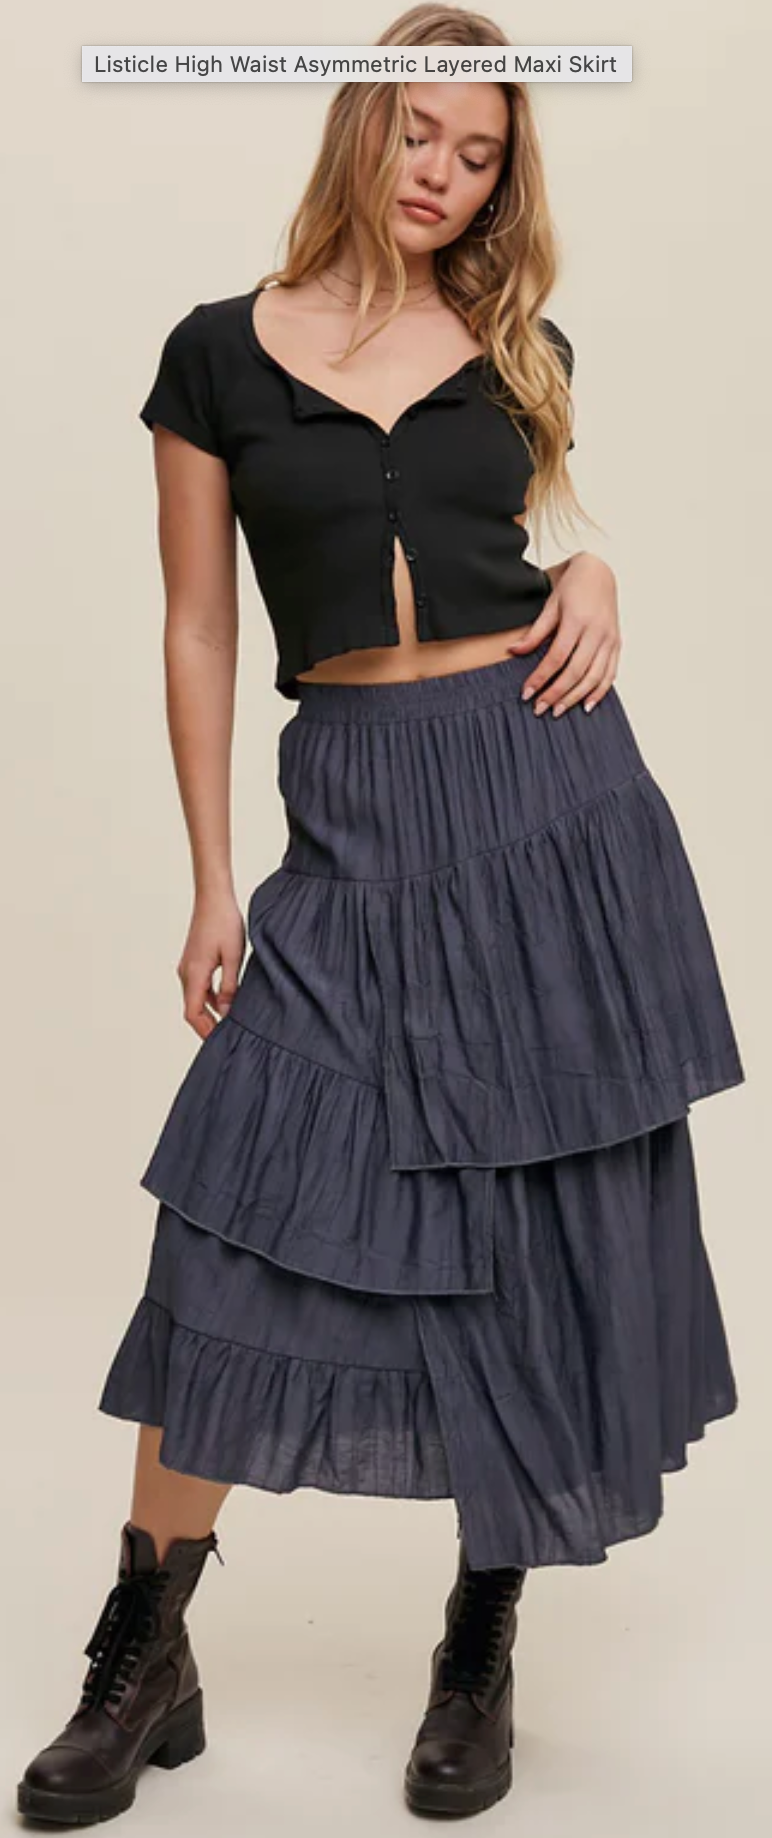 The Top Ten Skirt Trends of 2023 - PinkOrchidFashion